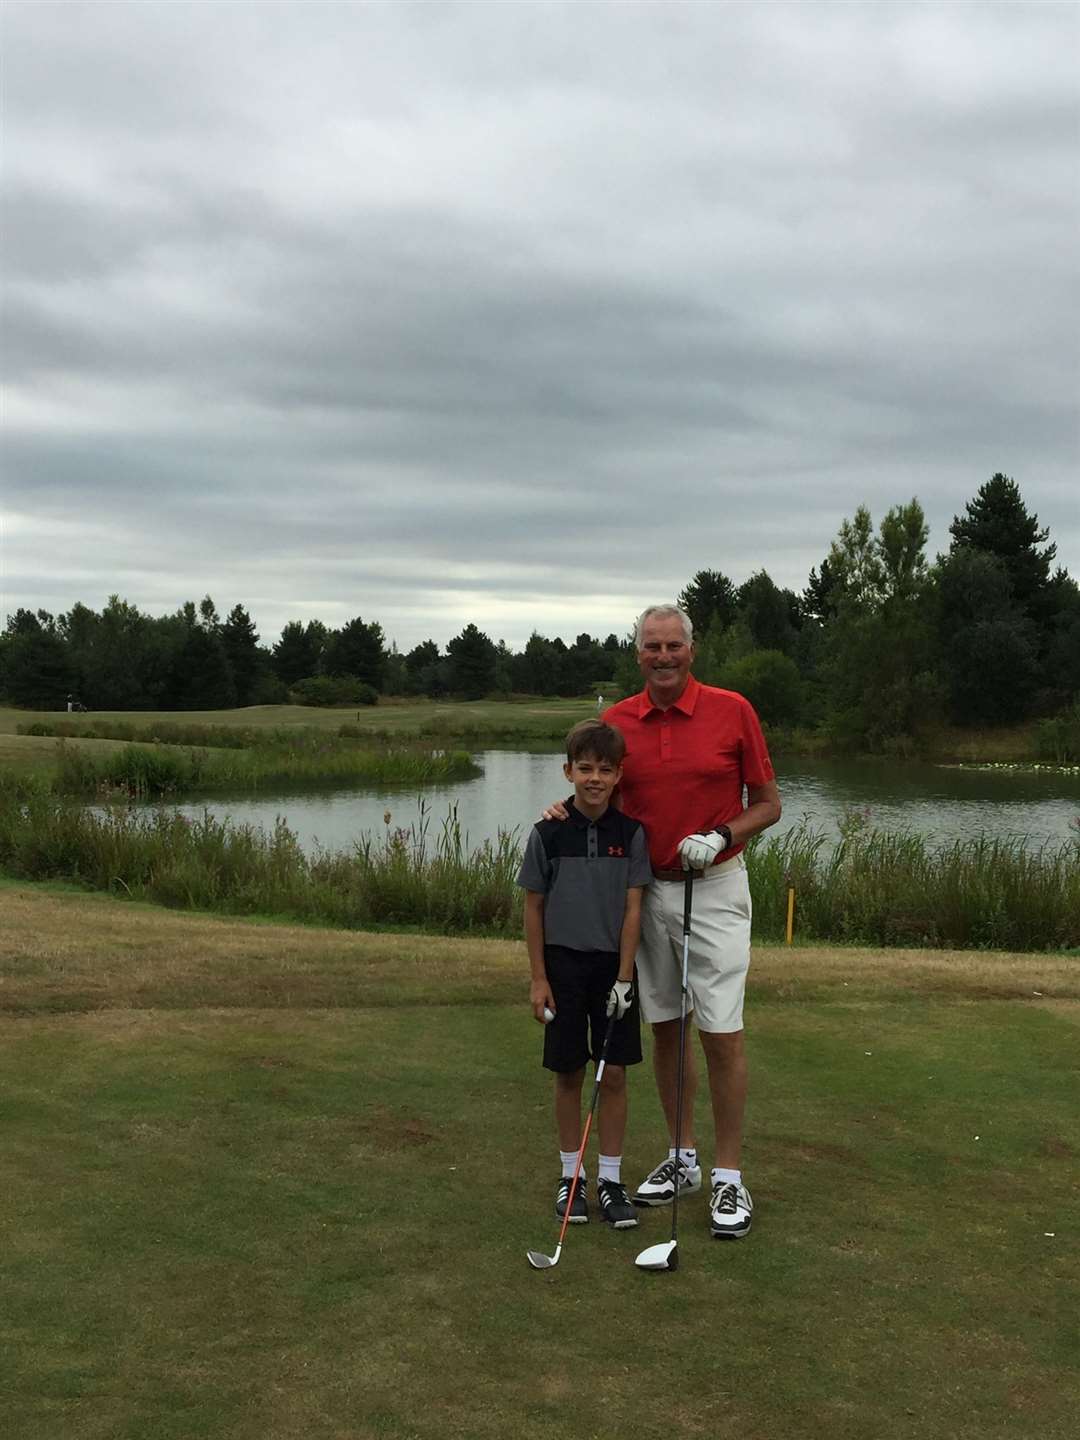 Jack Clemence (left) with his grandfather Ray (right) at a golf course (Jack Clemence)